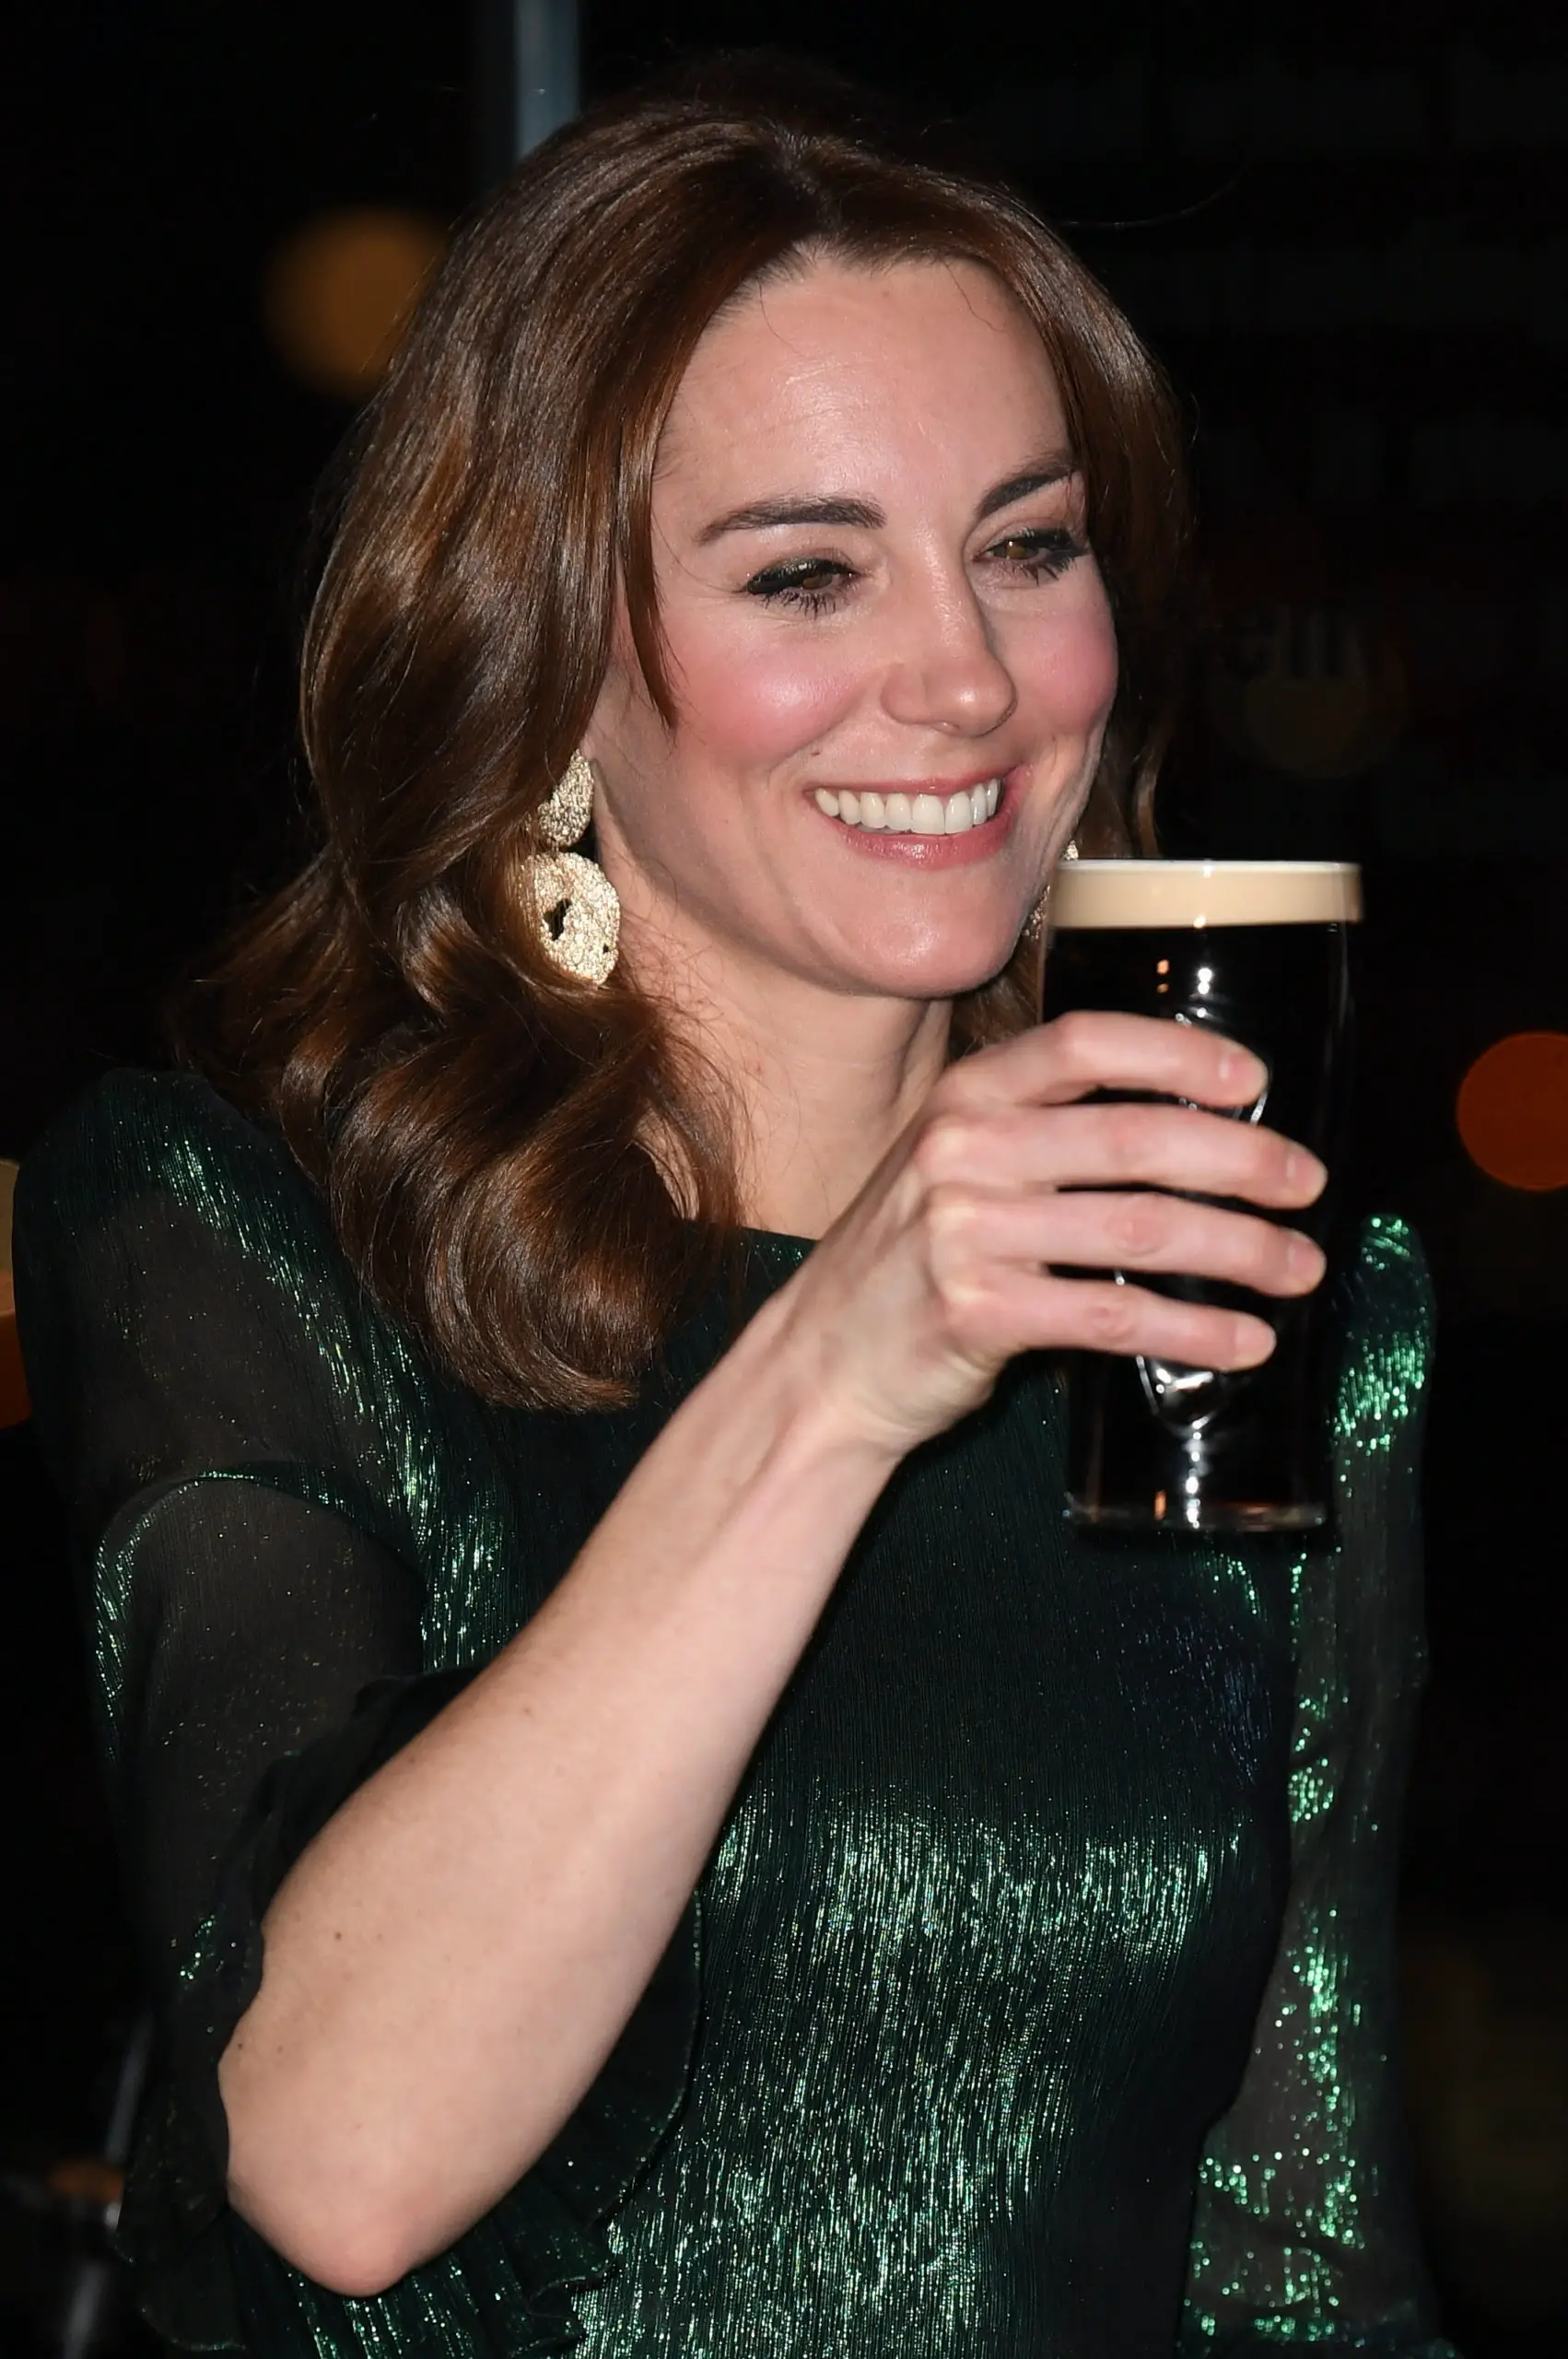 The Duchess of Cambridge holds a pint of Guinness during a reception hosted by the British Ambassador to Ireland at the Gravity Bar, Guinness Storehouse, Dublin, during a three day visit to the Republic of Ireland with her husband the Duke of Cambridge.